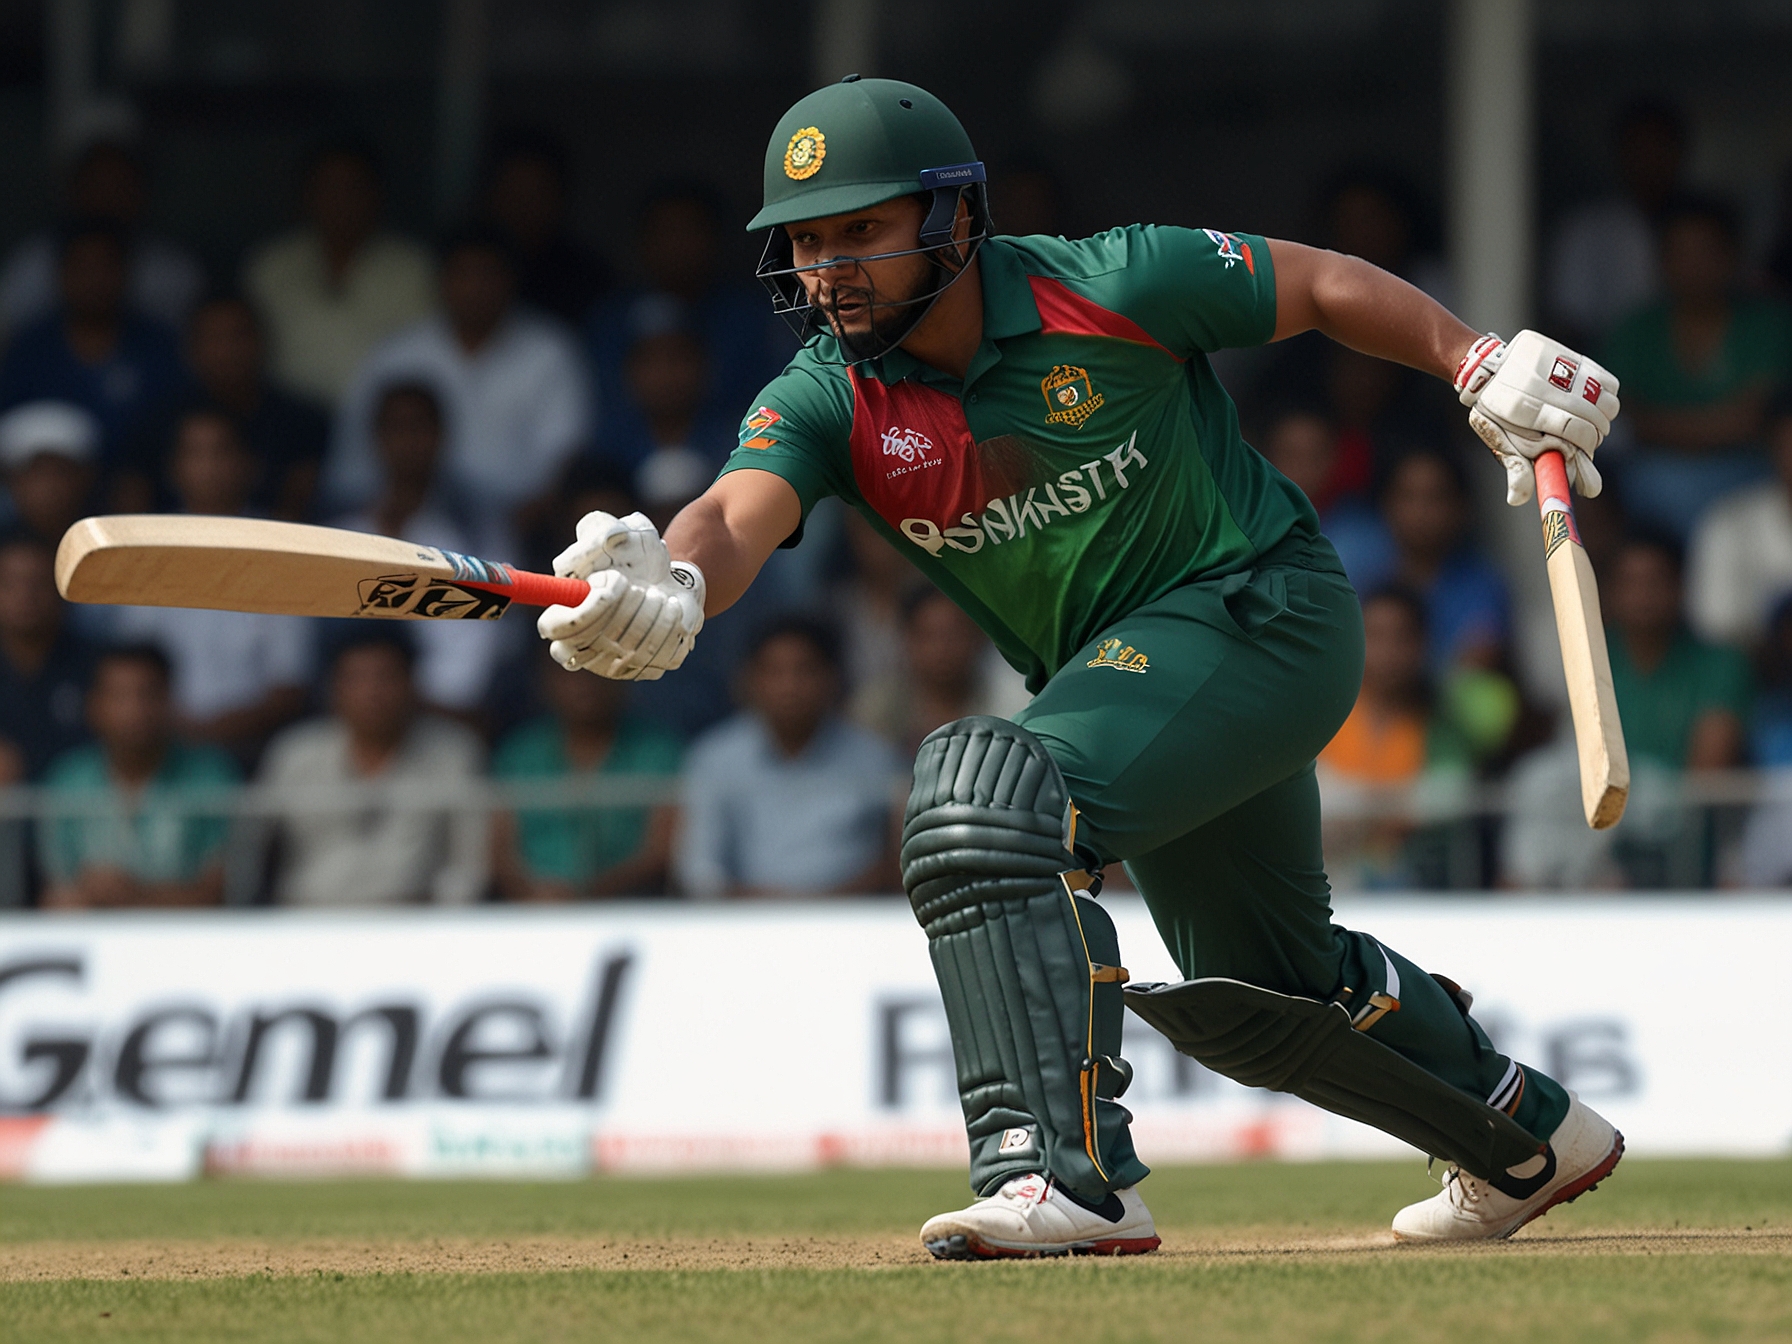 Bangladesh’s star player Shakib Al Hasan delivers a crucial spin ball during the T20 World Cup 2024 match against India, as his team fights to keep their semi-final hopes alive.